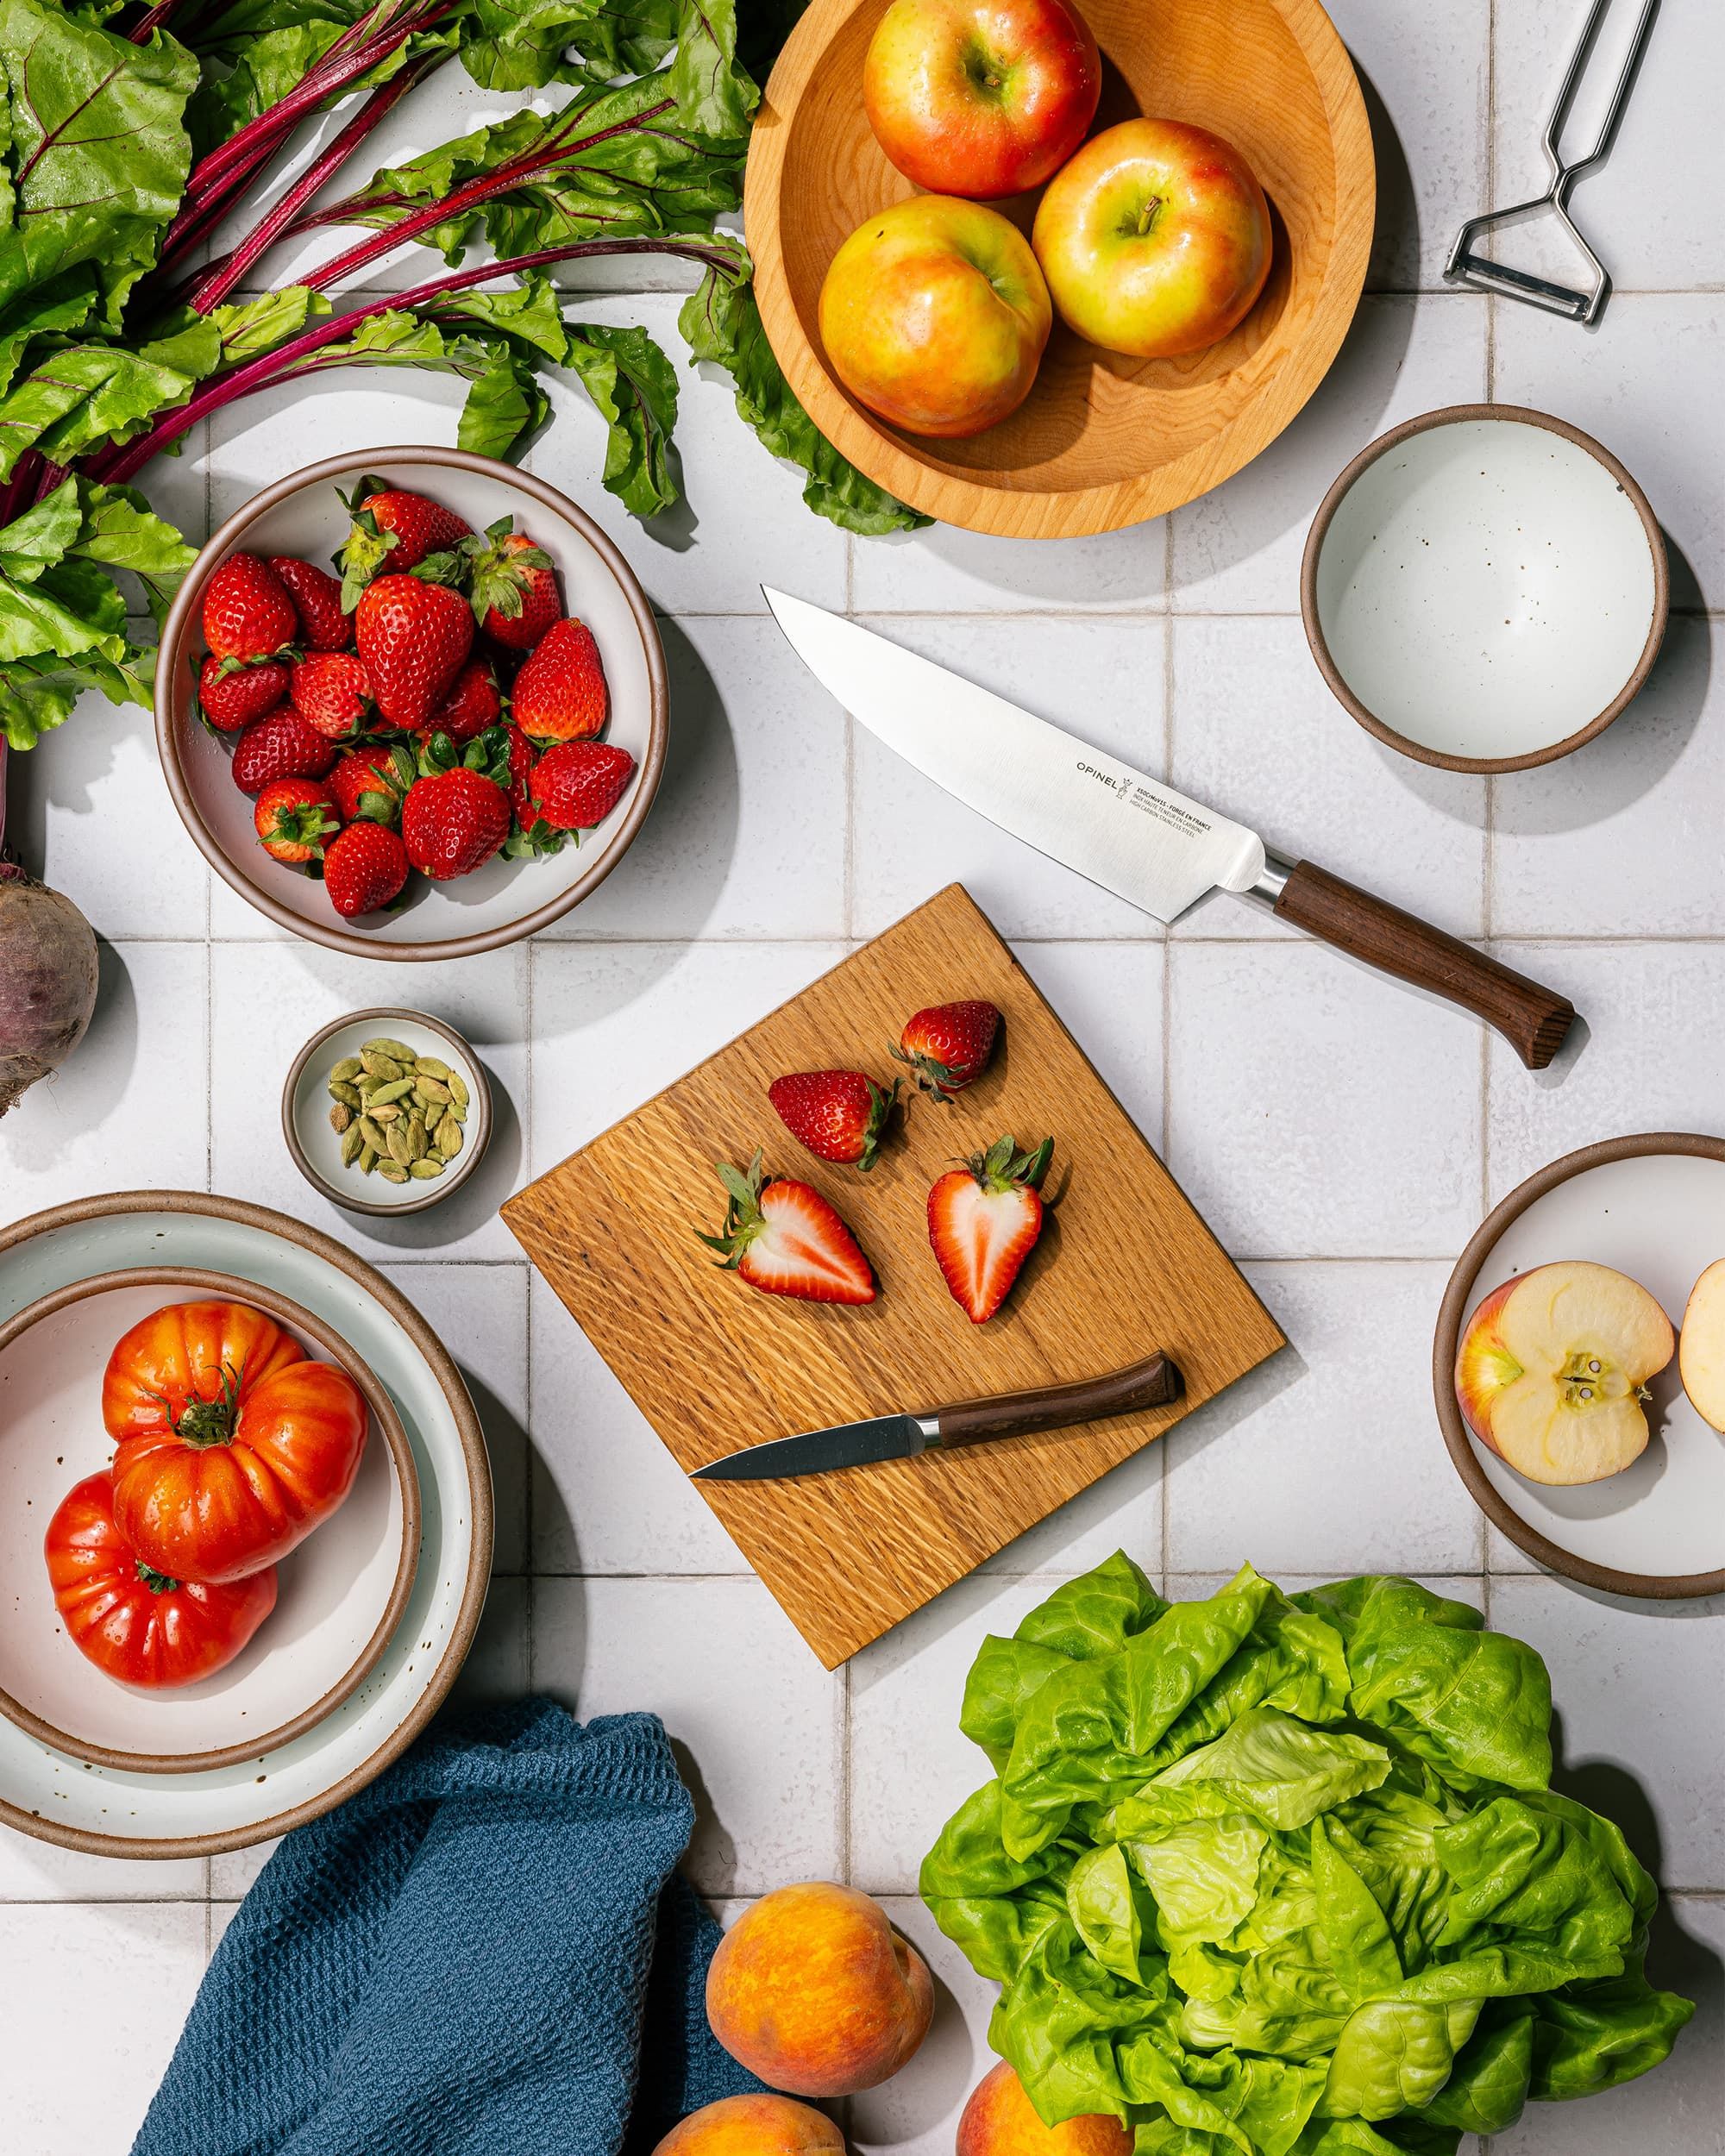 An overhead view of a kitchen counter spread featuring fruits and vegetables being prepped and sliced, chef's knife, paring knife, ceramic bowls and plates in cool white colors, a blue kitchen towel, a small cutting board and more.